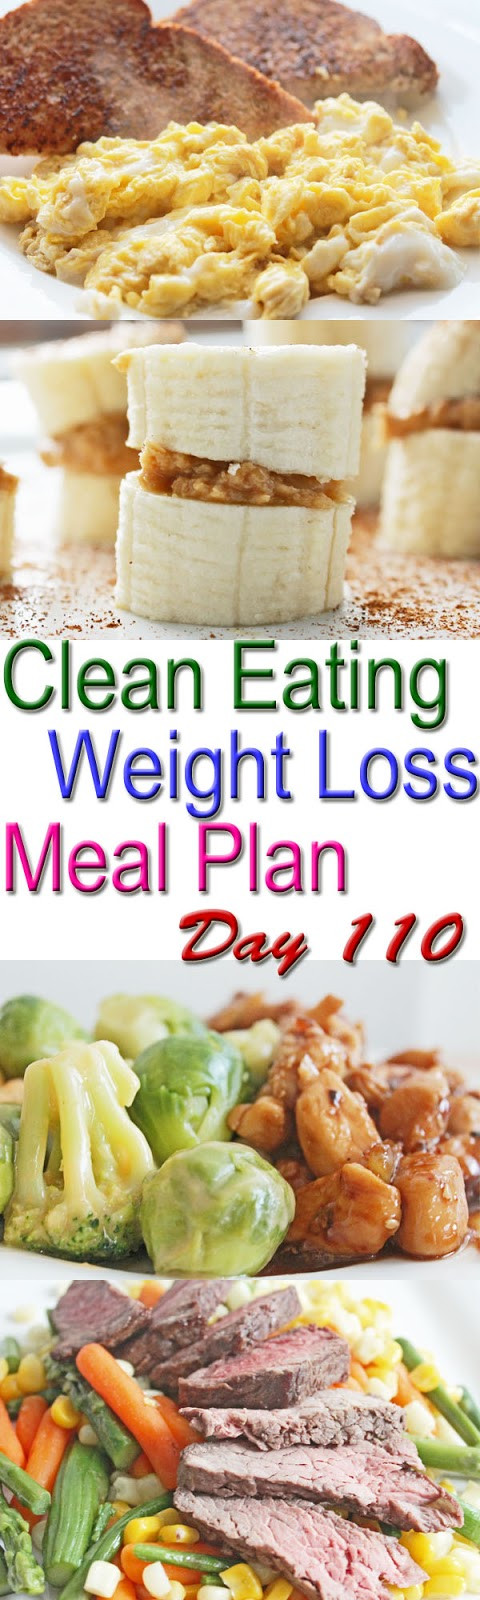 Clean Eating Weight Loss Meal Plans
 Clean Eating Weight Loss Meal Plan 110